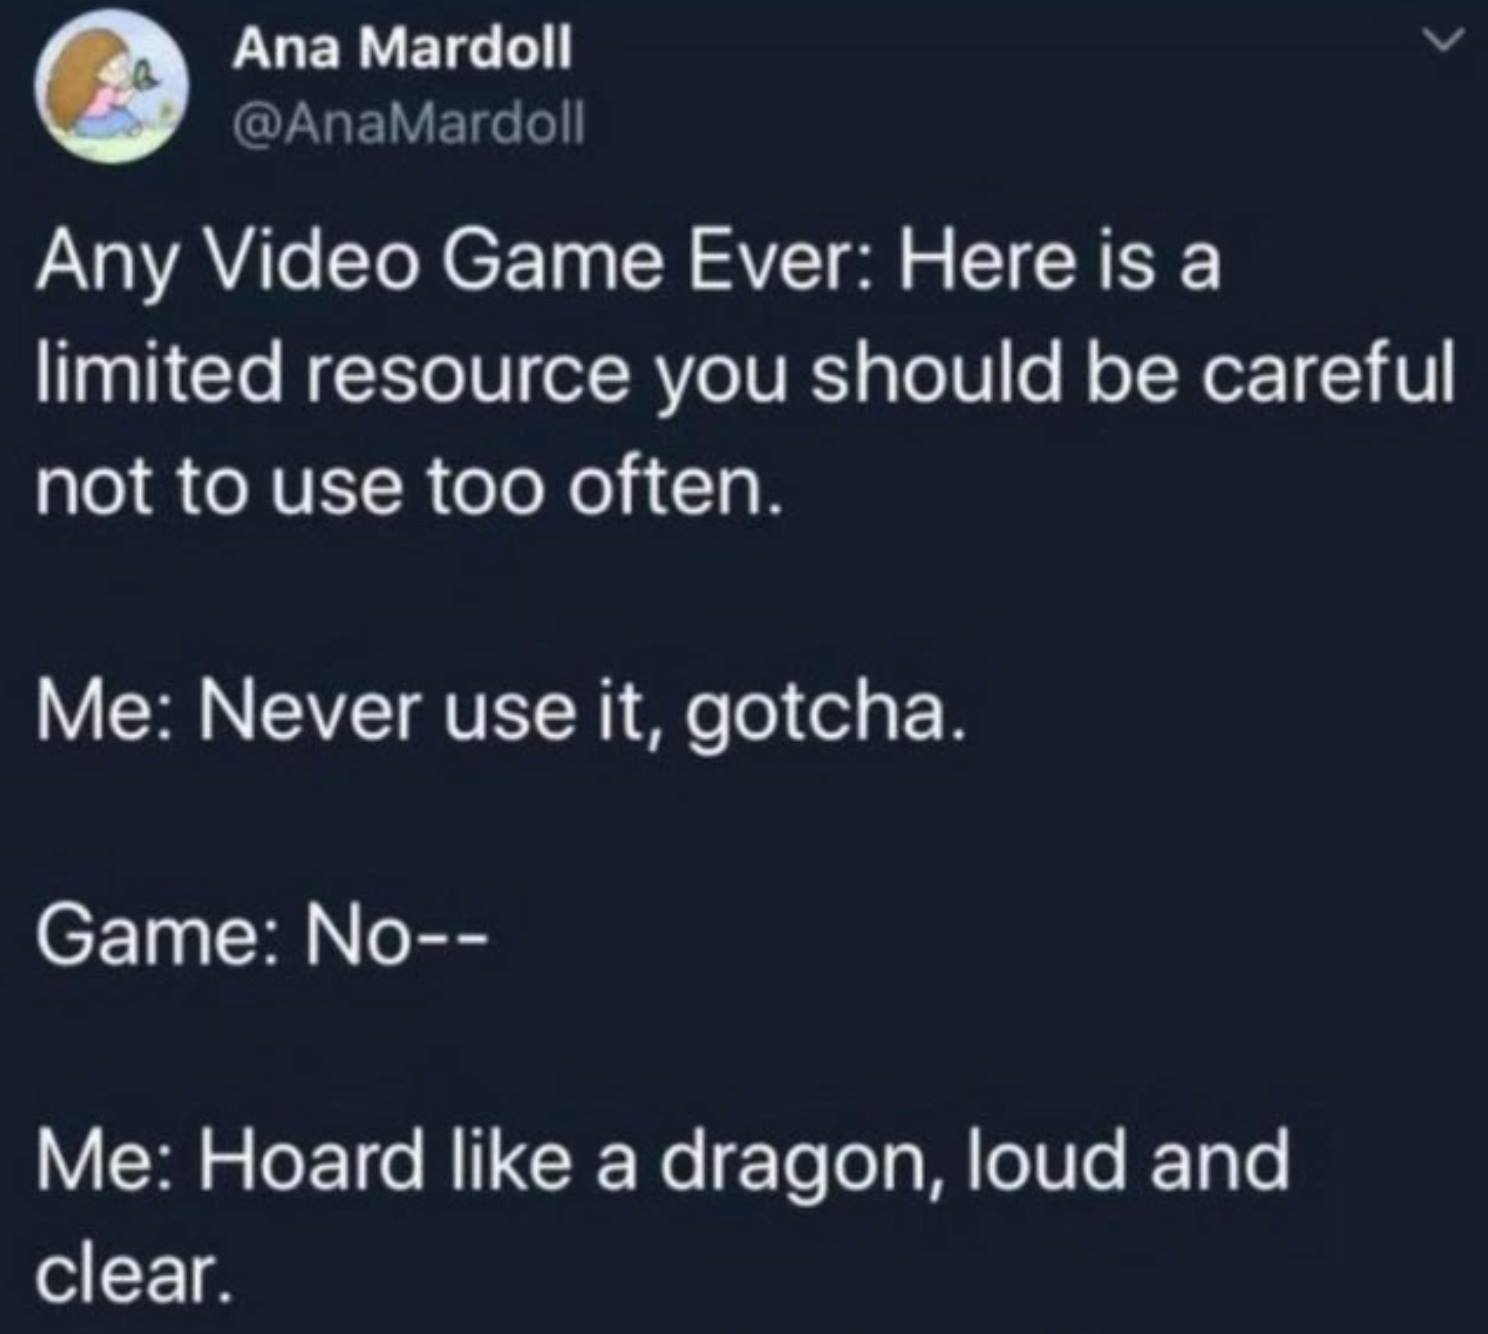 funny video game memes - Any Video Game Ever Here is a limited resource you should be careful not to use too often. Me Never use it, gotcha. Game No Me Hoard a dragon, loud and clear.